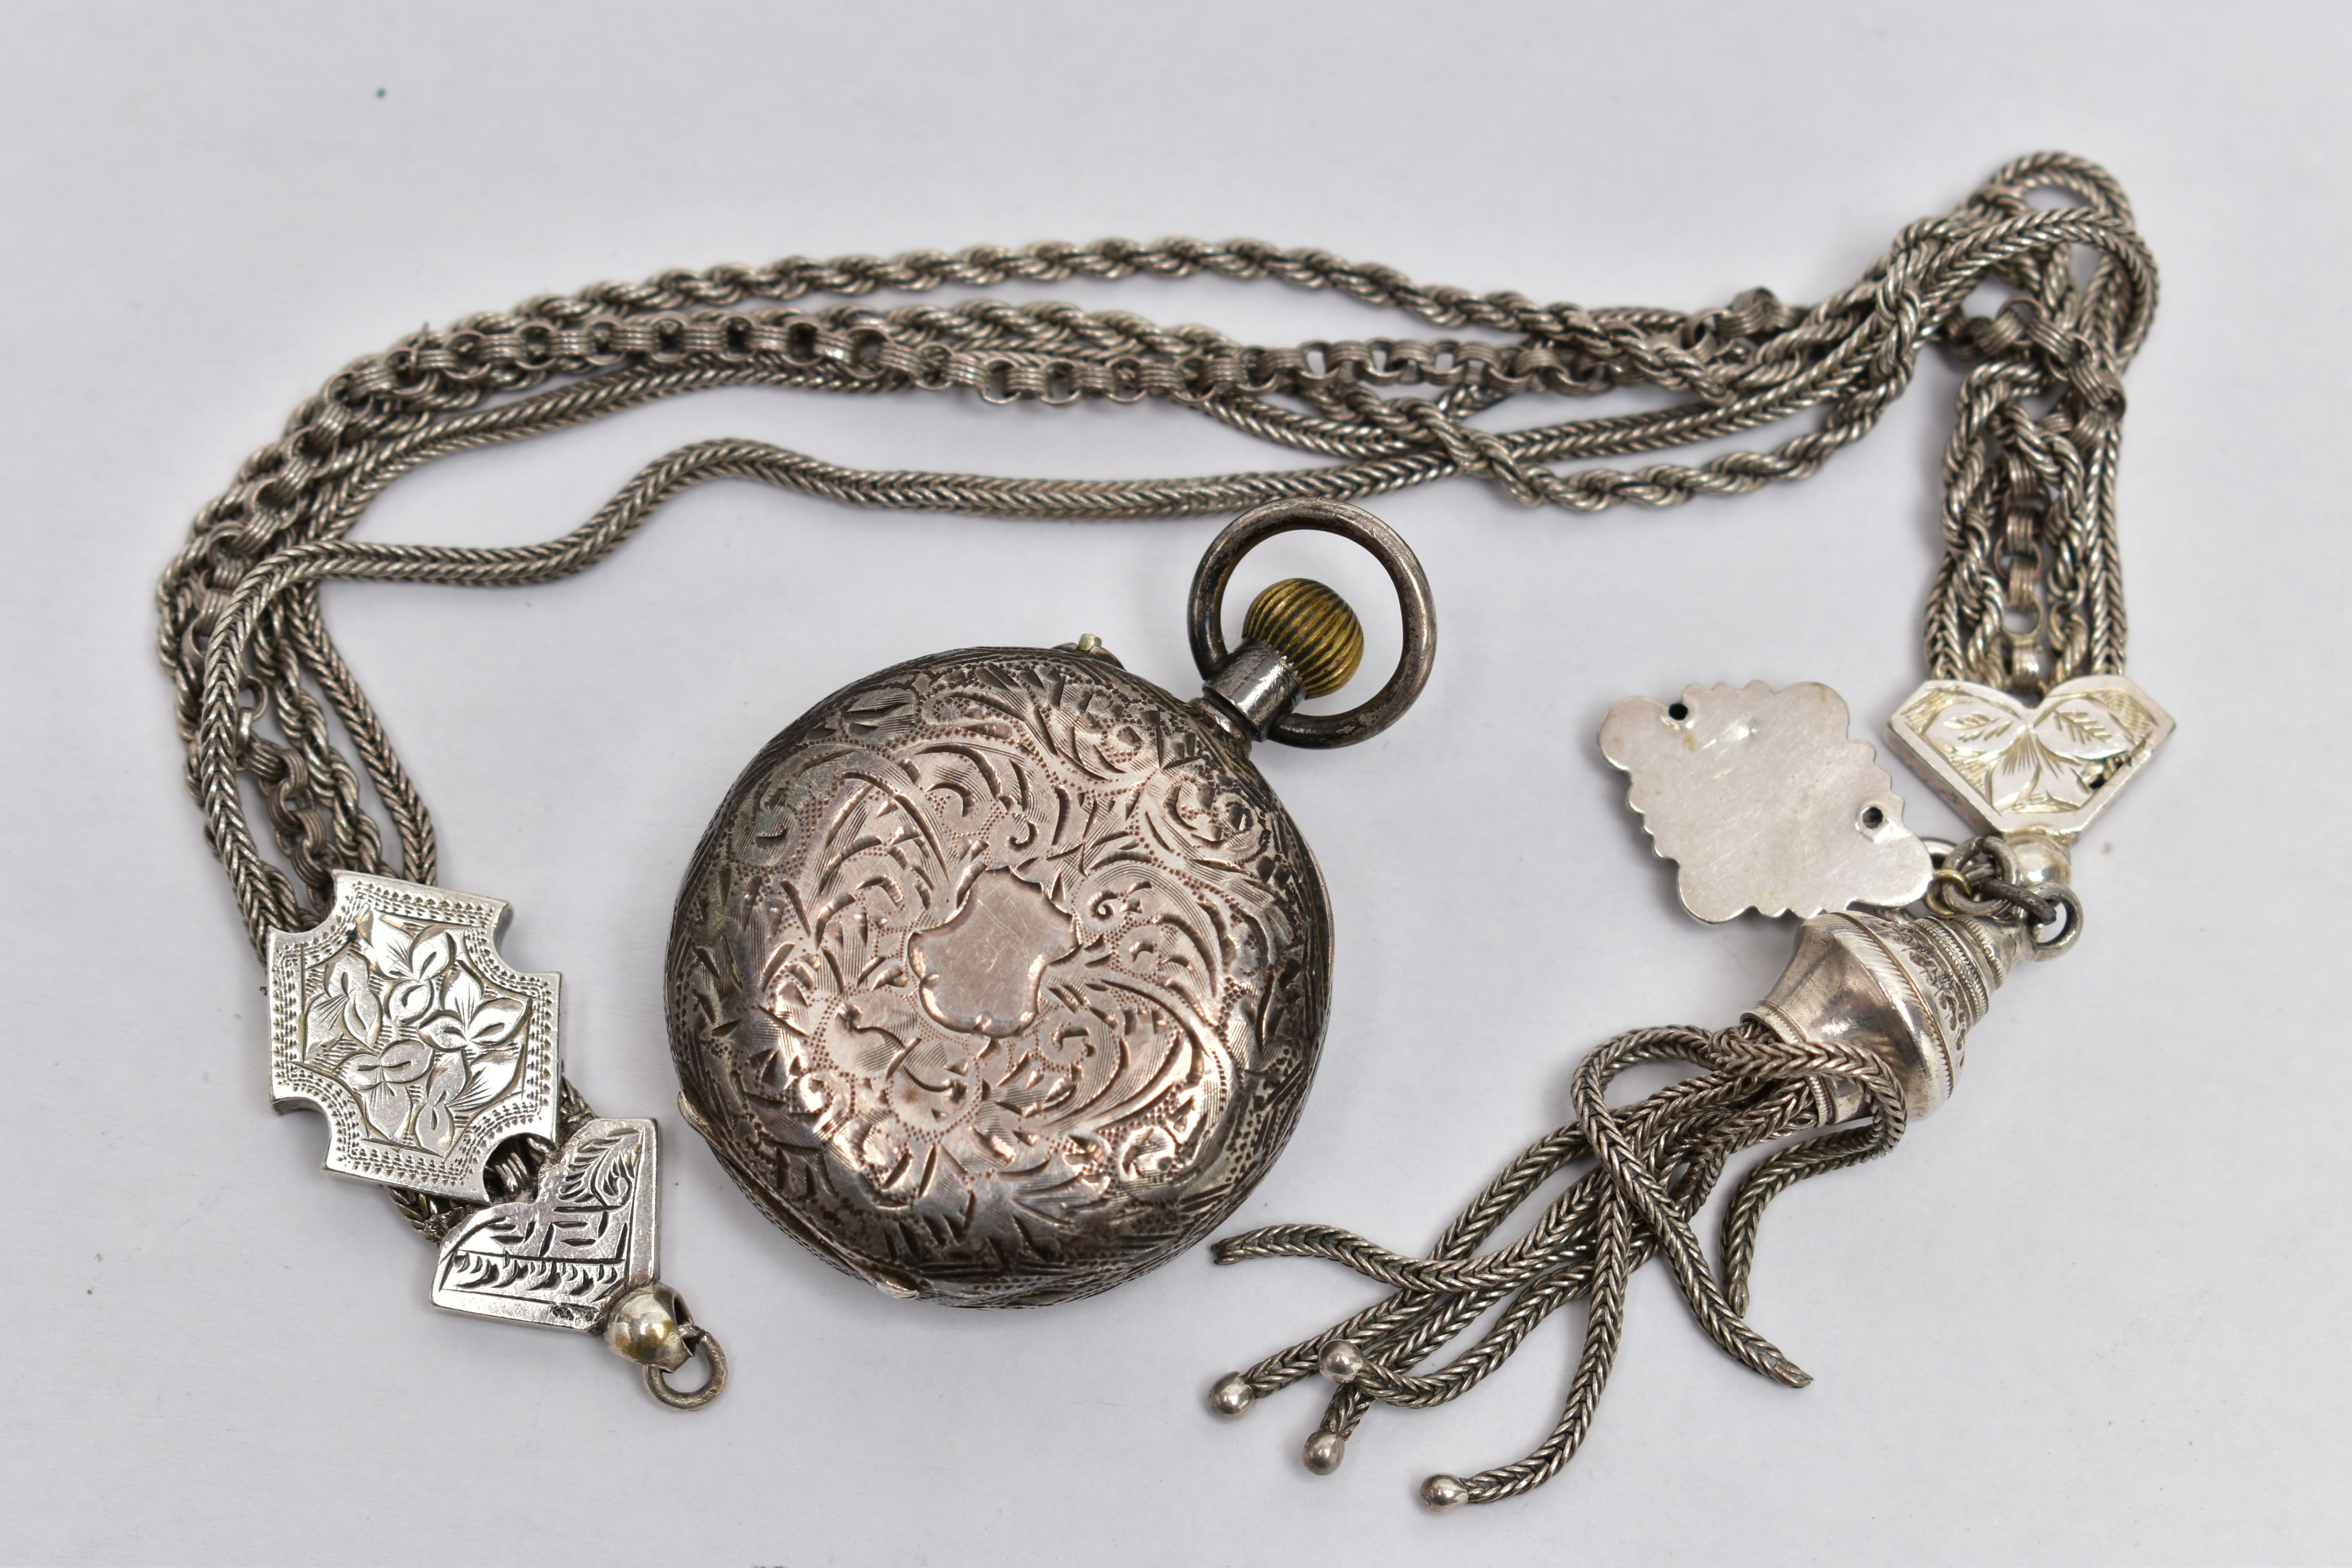 A SMALL OPEN FACE POCKET WATCH AND ALBERTINA, the manual wind pocket watch with round white dial, - Image 2 of 4